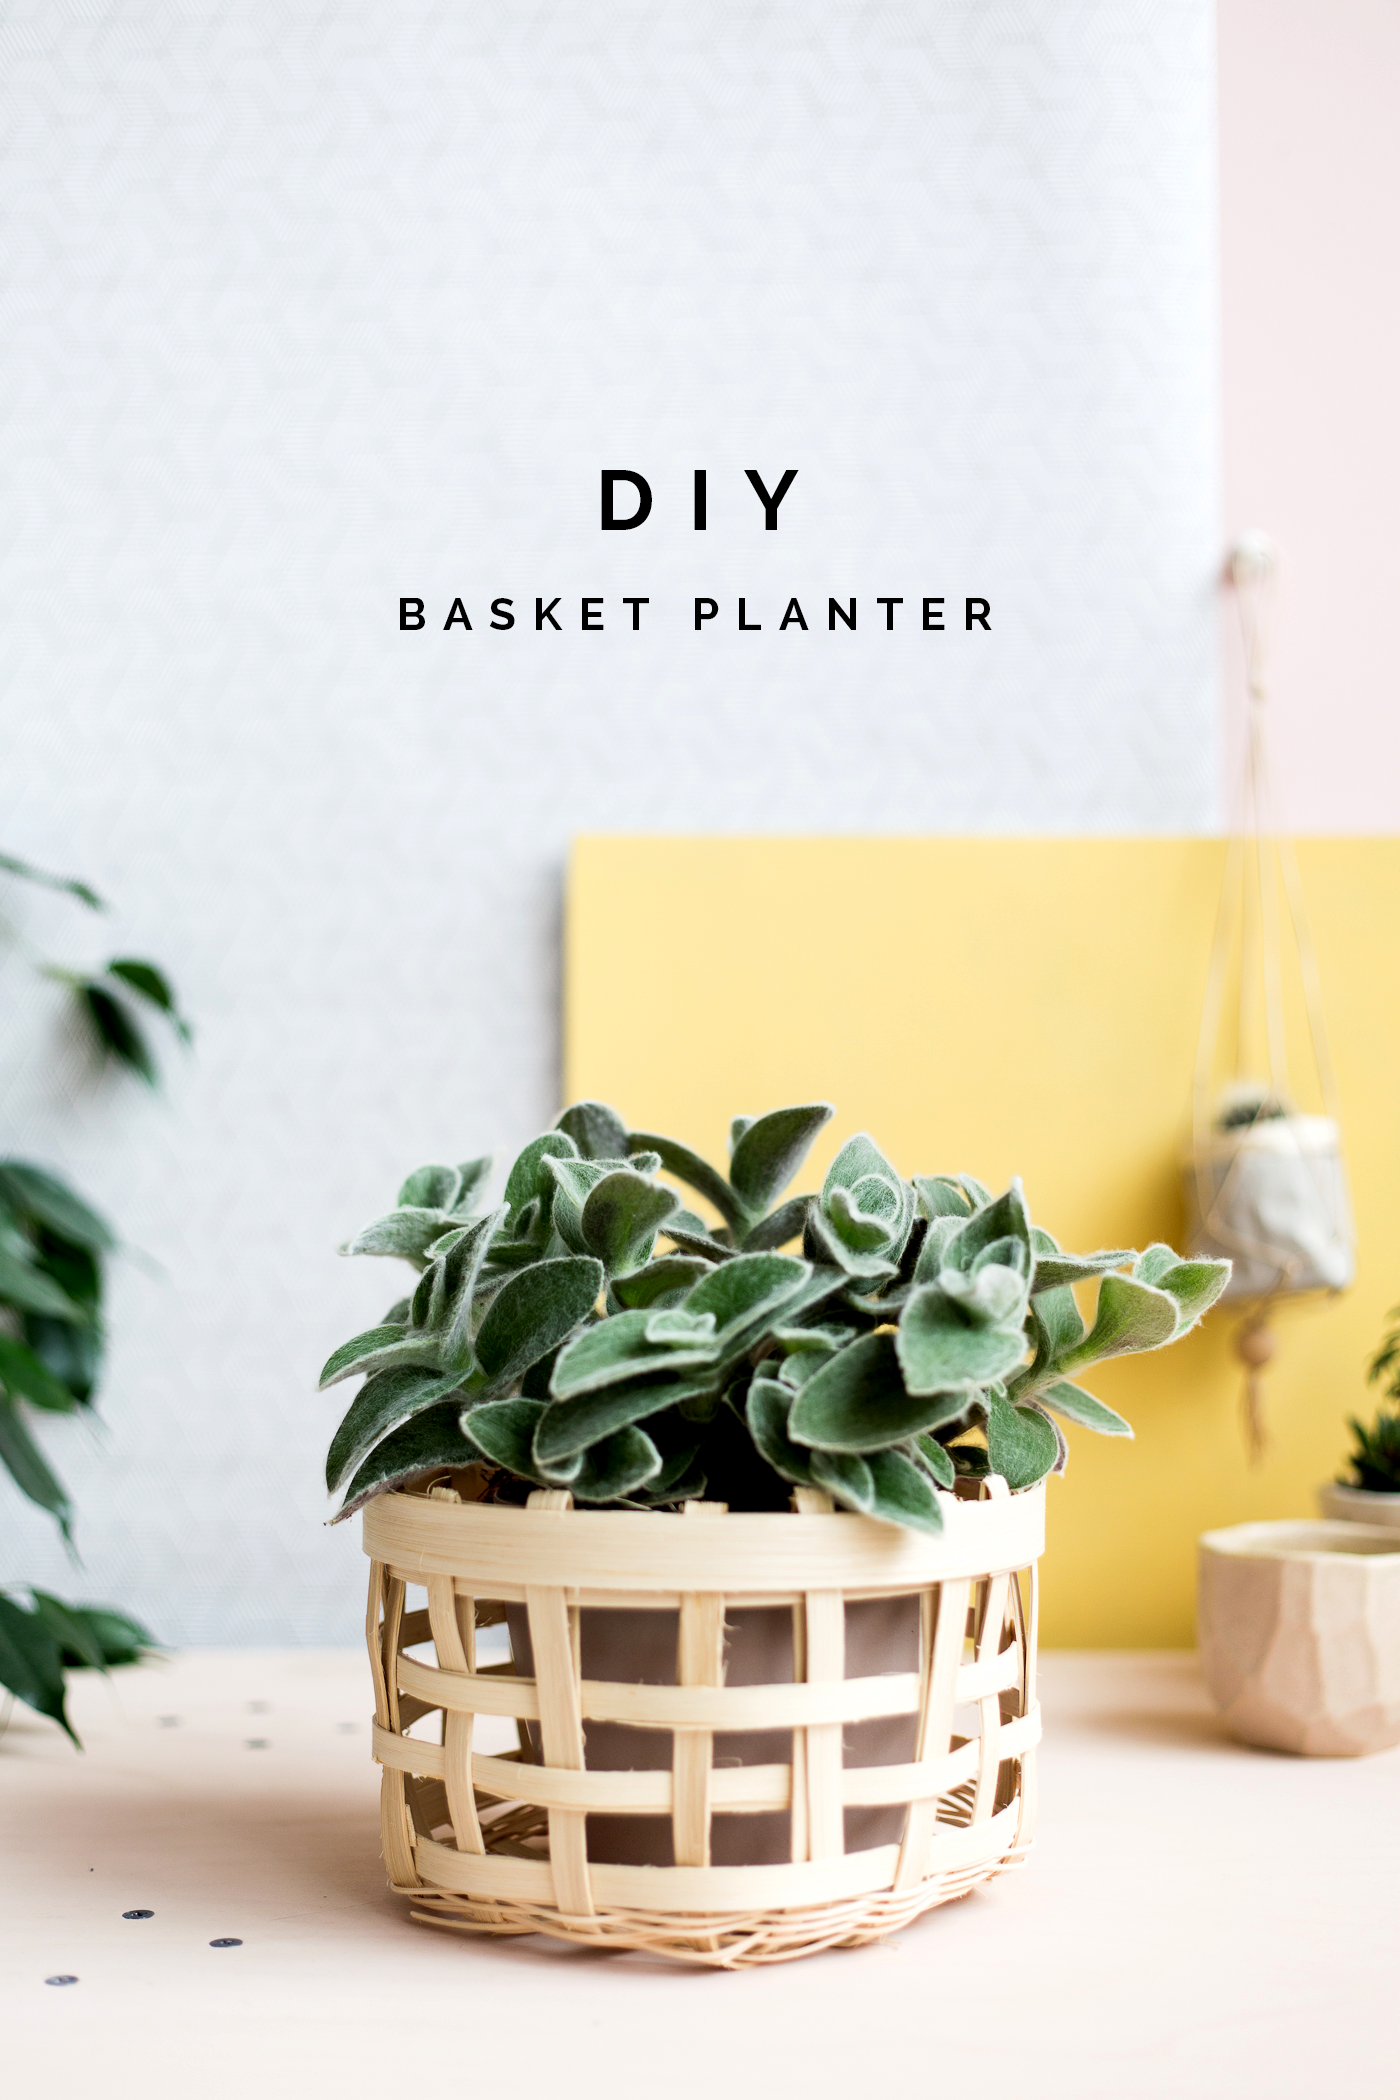 How to Turn a Woven Basket Into a Pretty Planter